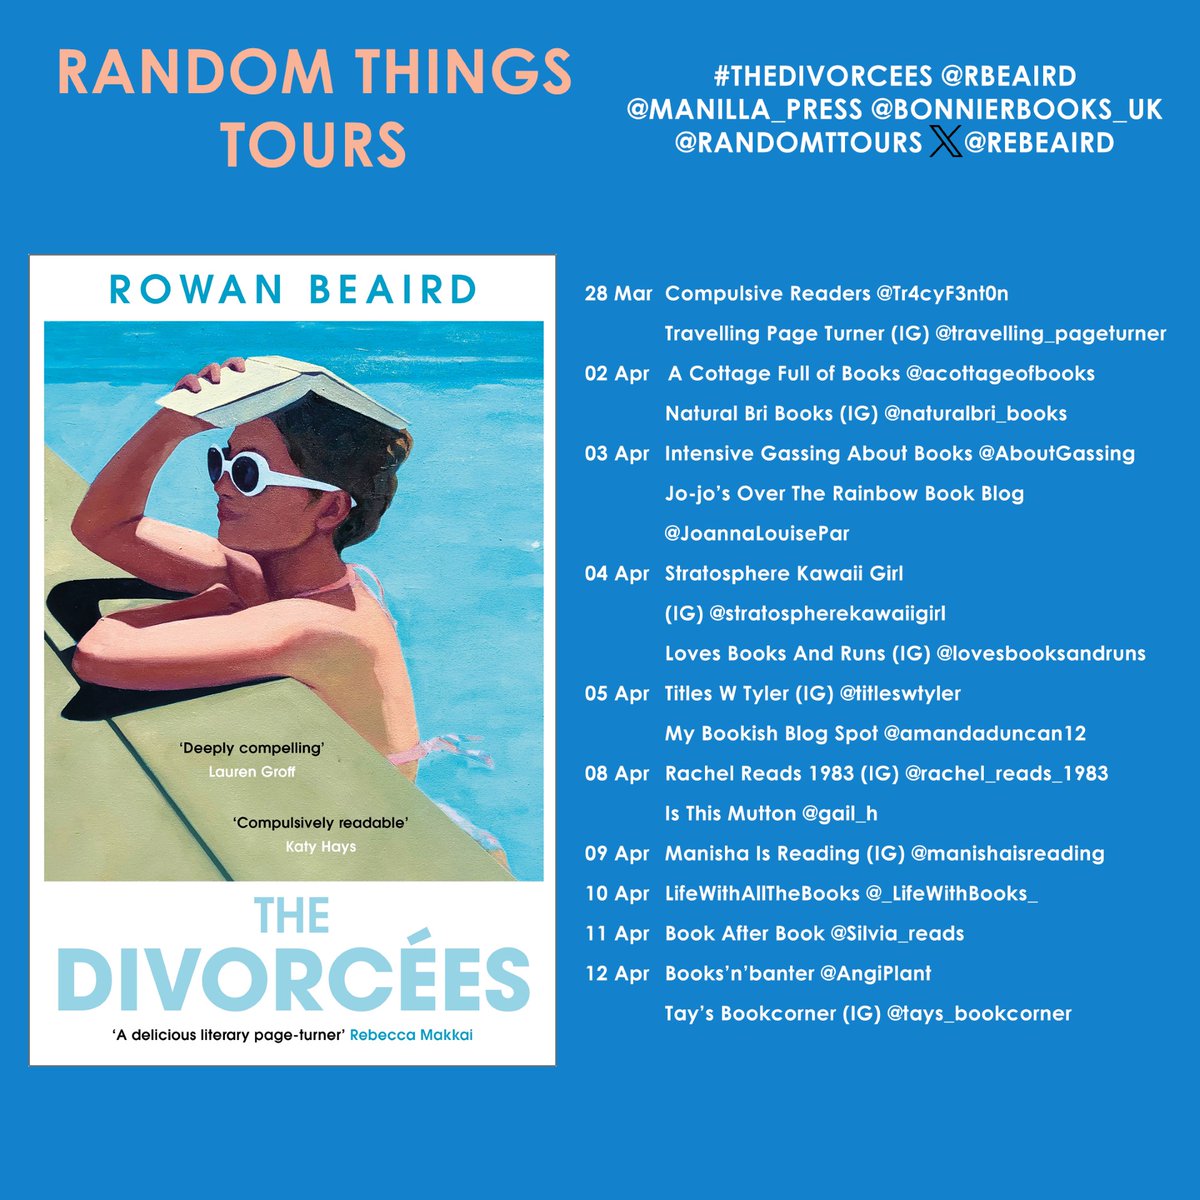 HUGEST THANKS #RandomThingsTours Bloggers for supporting #TheDivorcees @rebeaird @bonnierbooks_uk Please share reviews on Amazon/Goodreads @AngiPlant